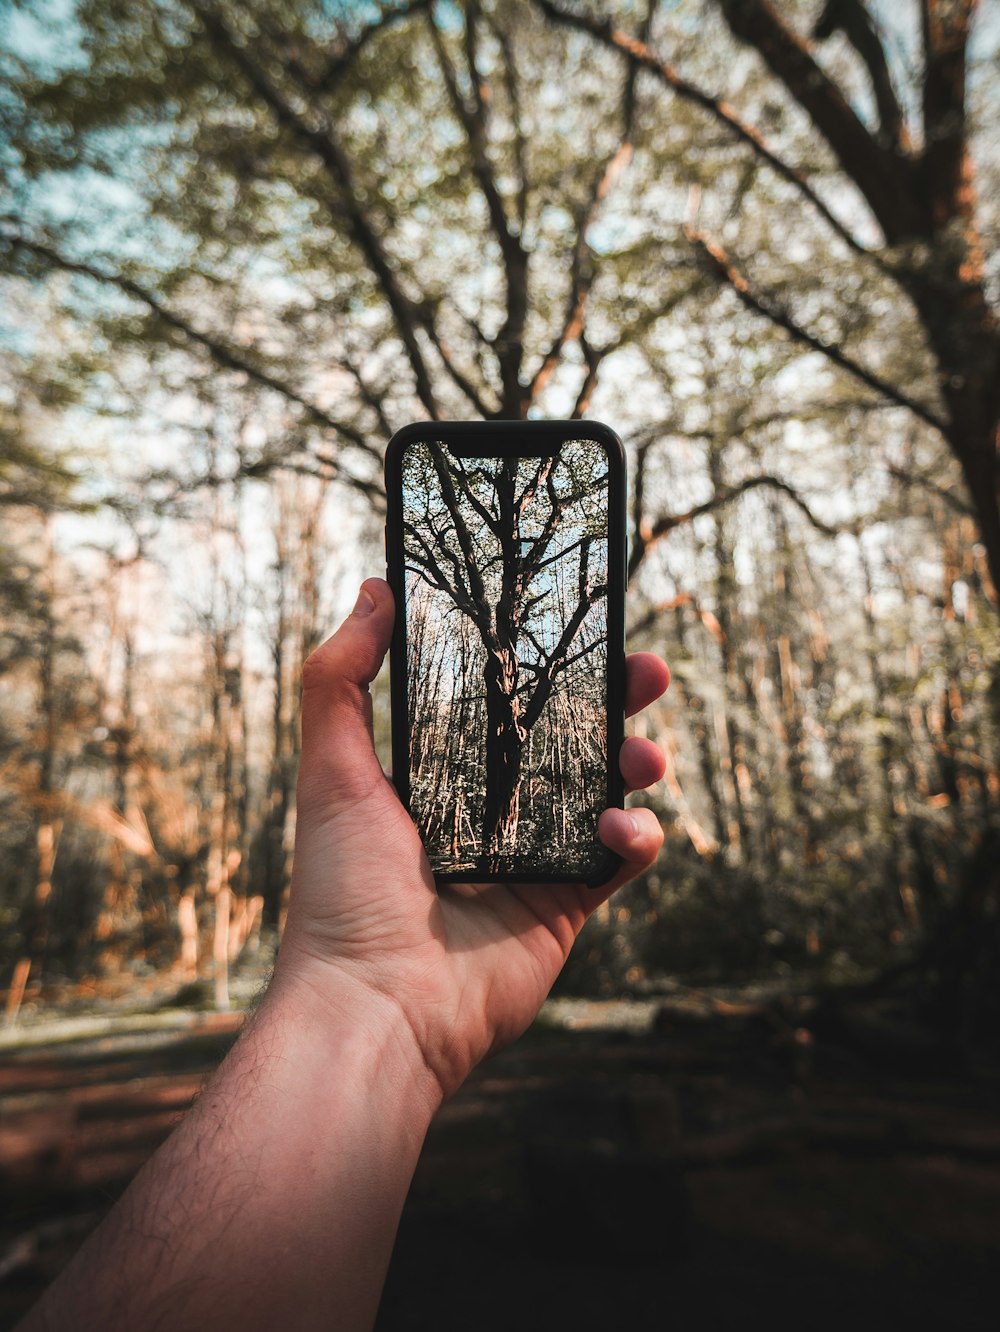 person holding black smartphone taking photo of trees during daytime